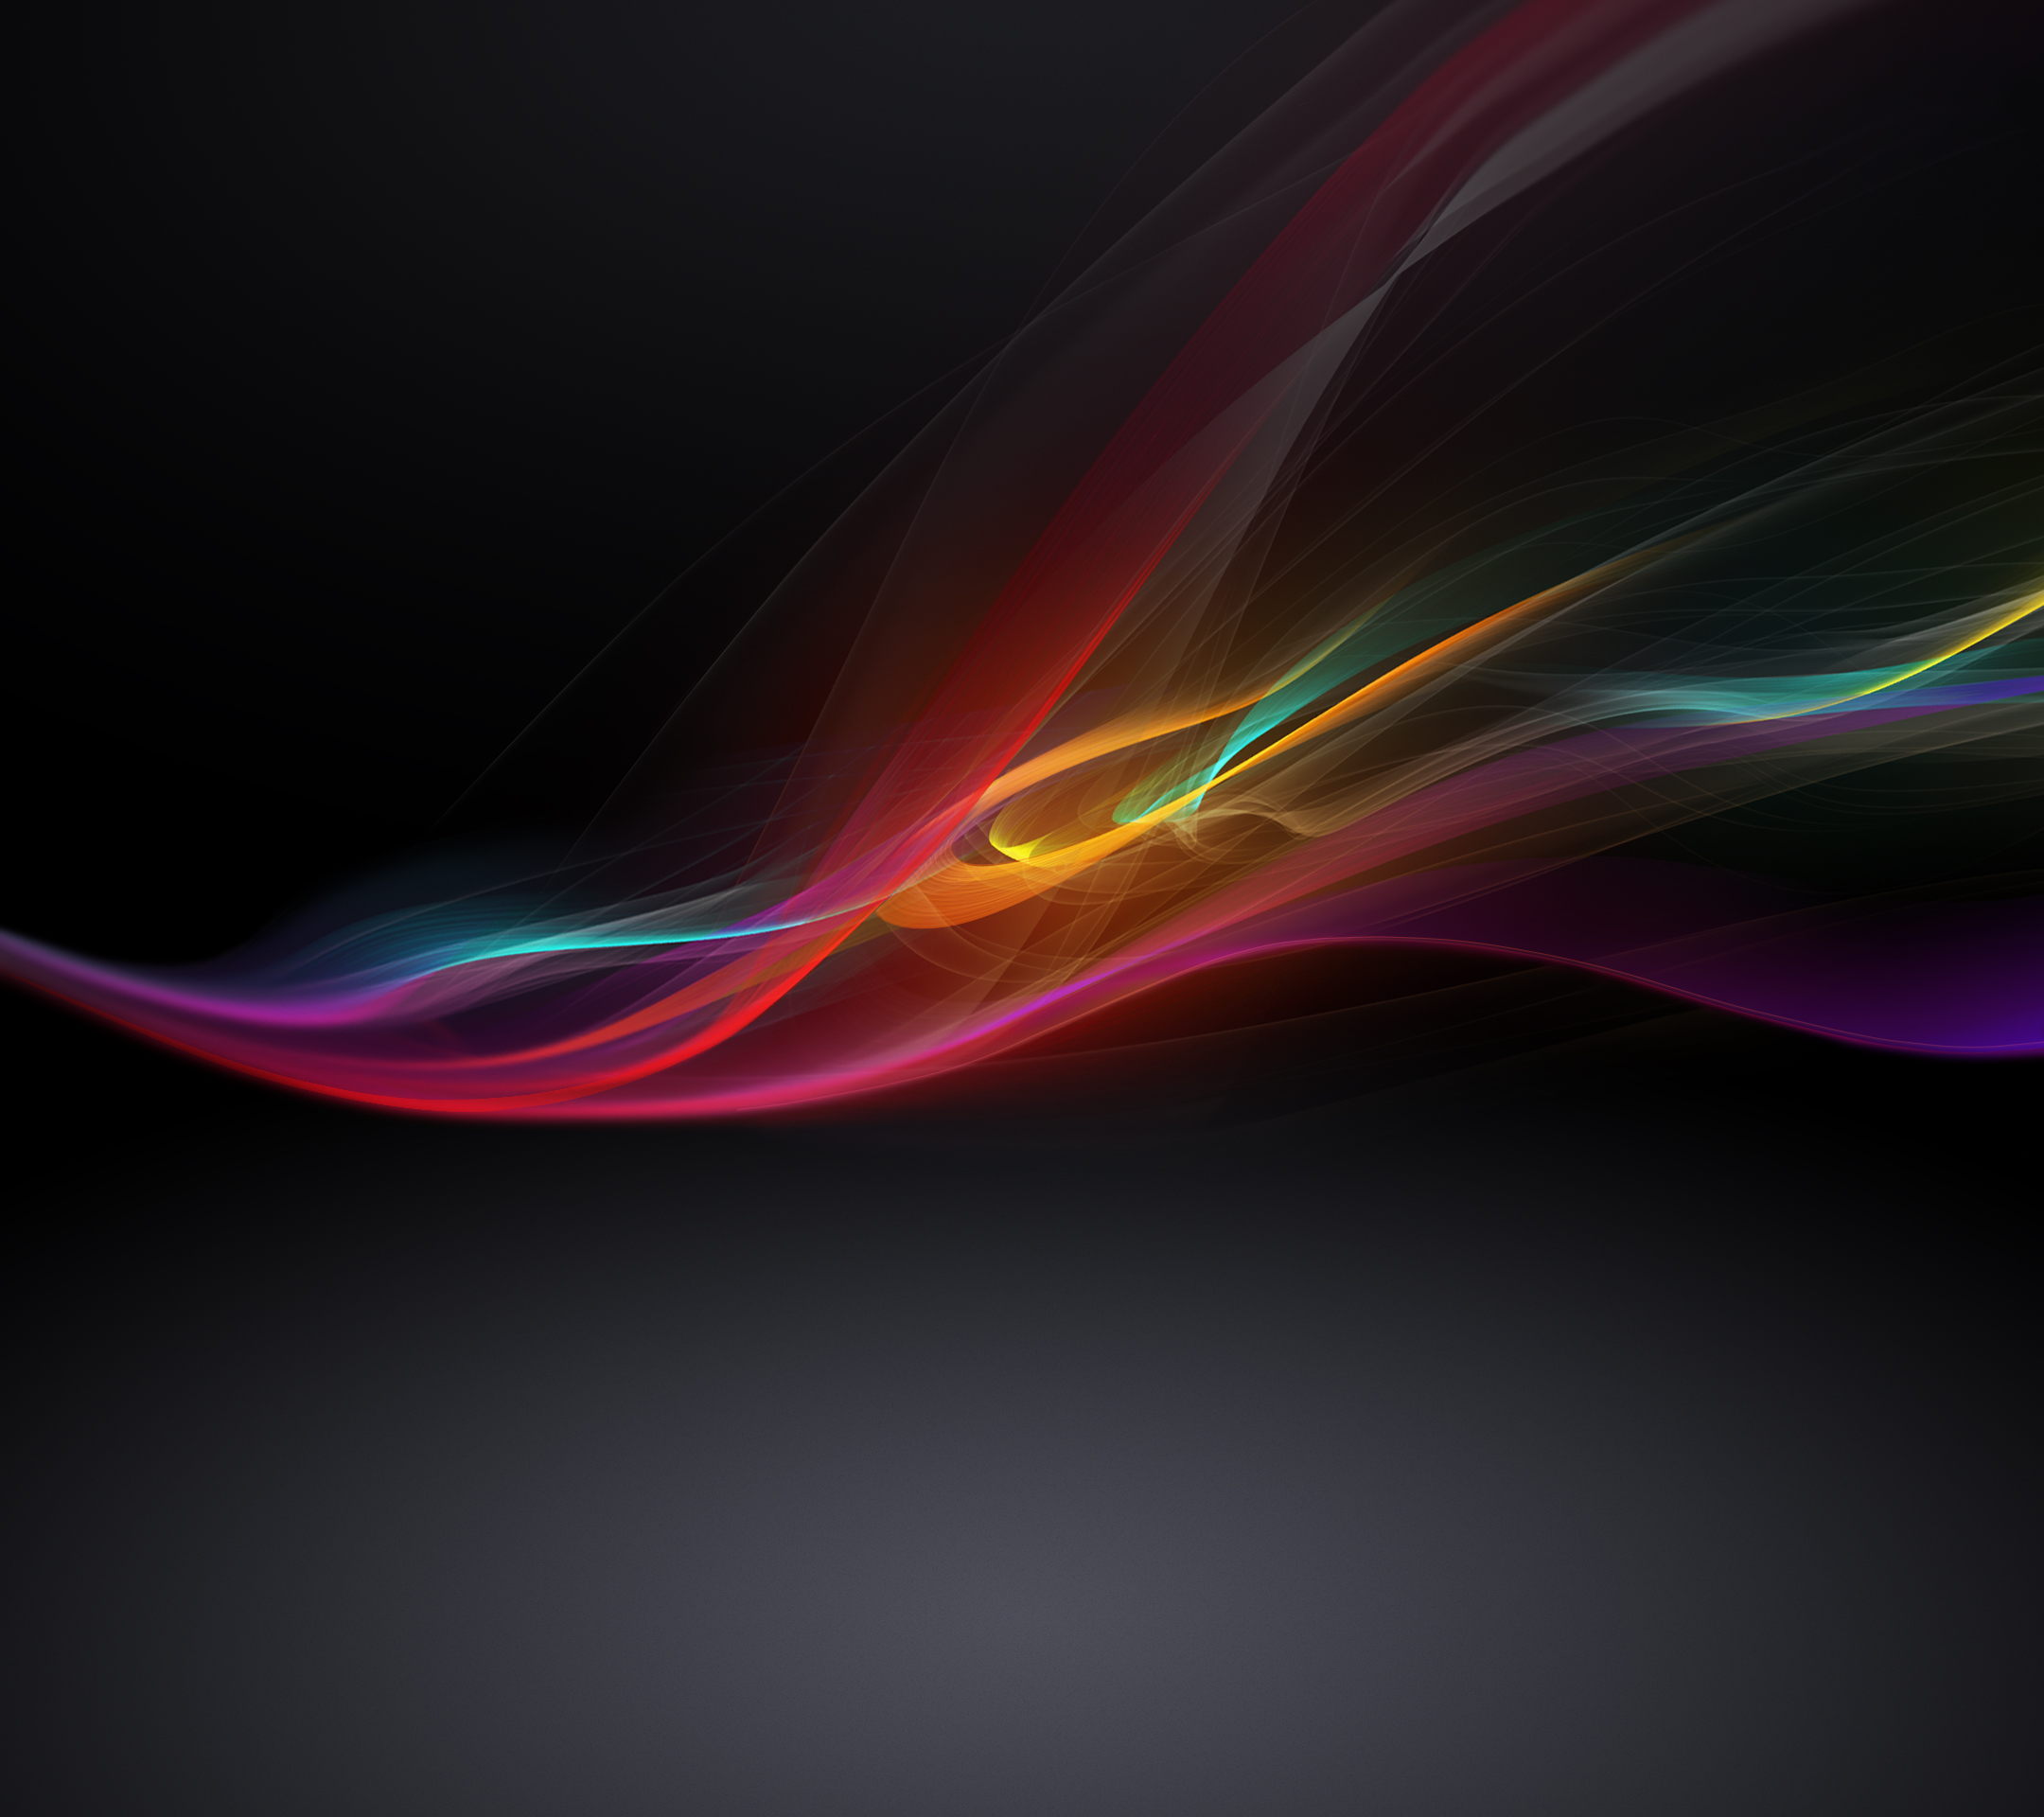 motley, abstract, multicolored, wavy, curve cell phone wallpapers